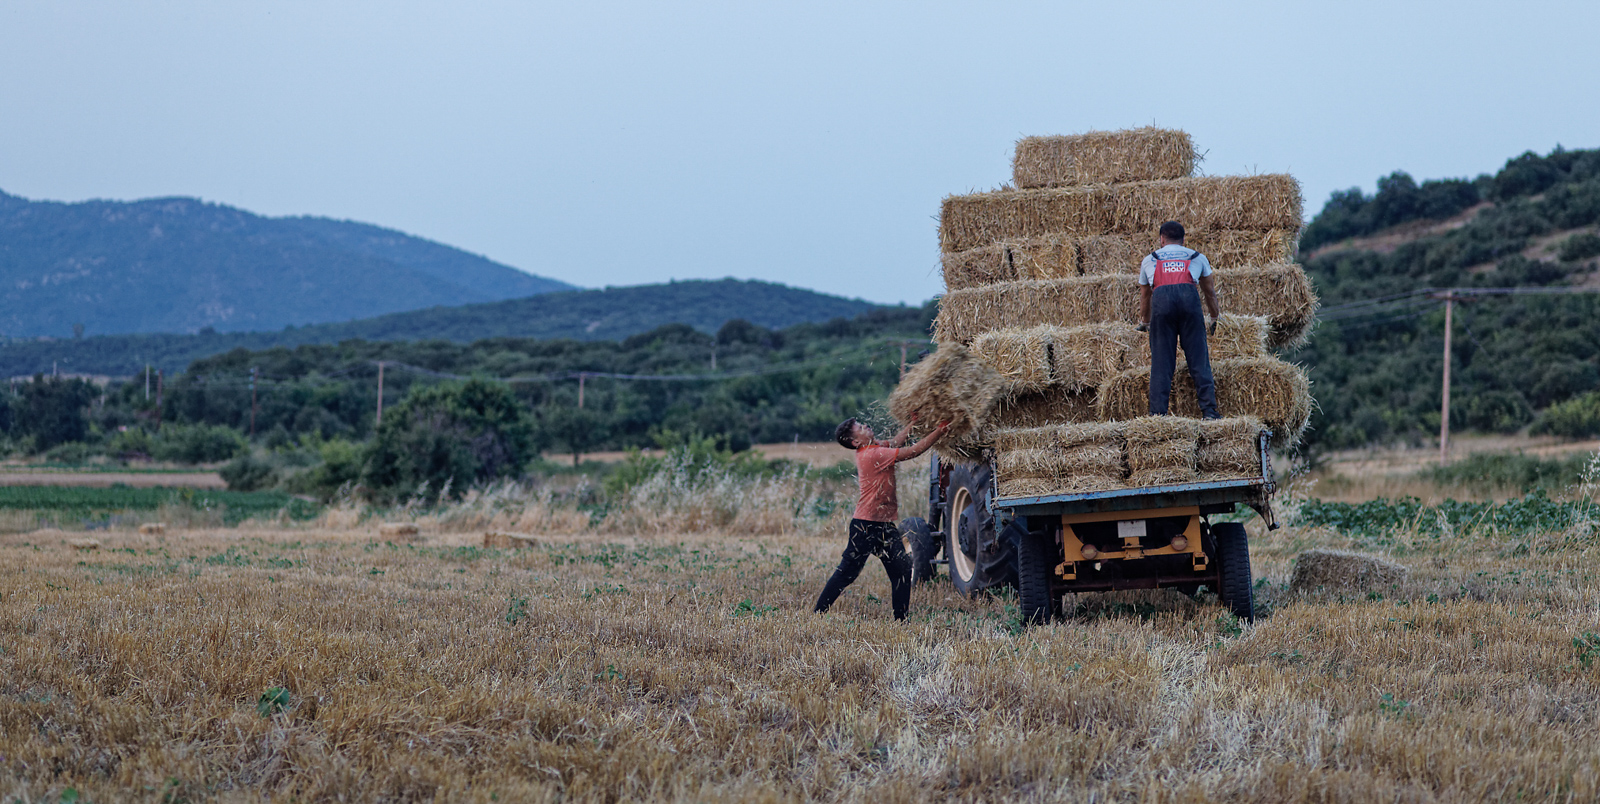 Members of Thrace's Muslim minority stack hay on a truck during the harvest season. Photography for Hyphen by Iason Athanasiadis